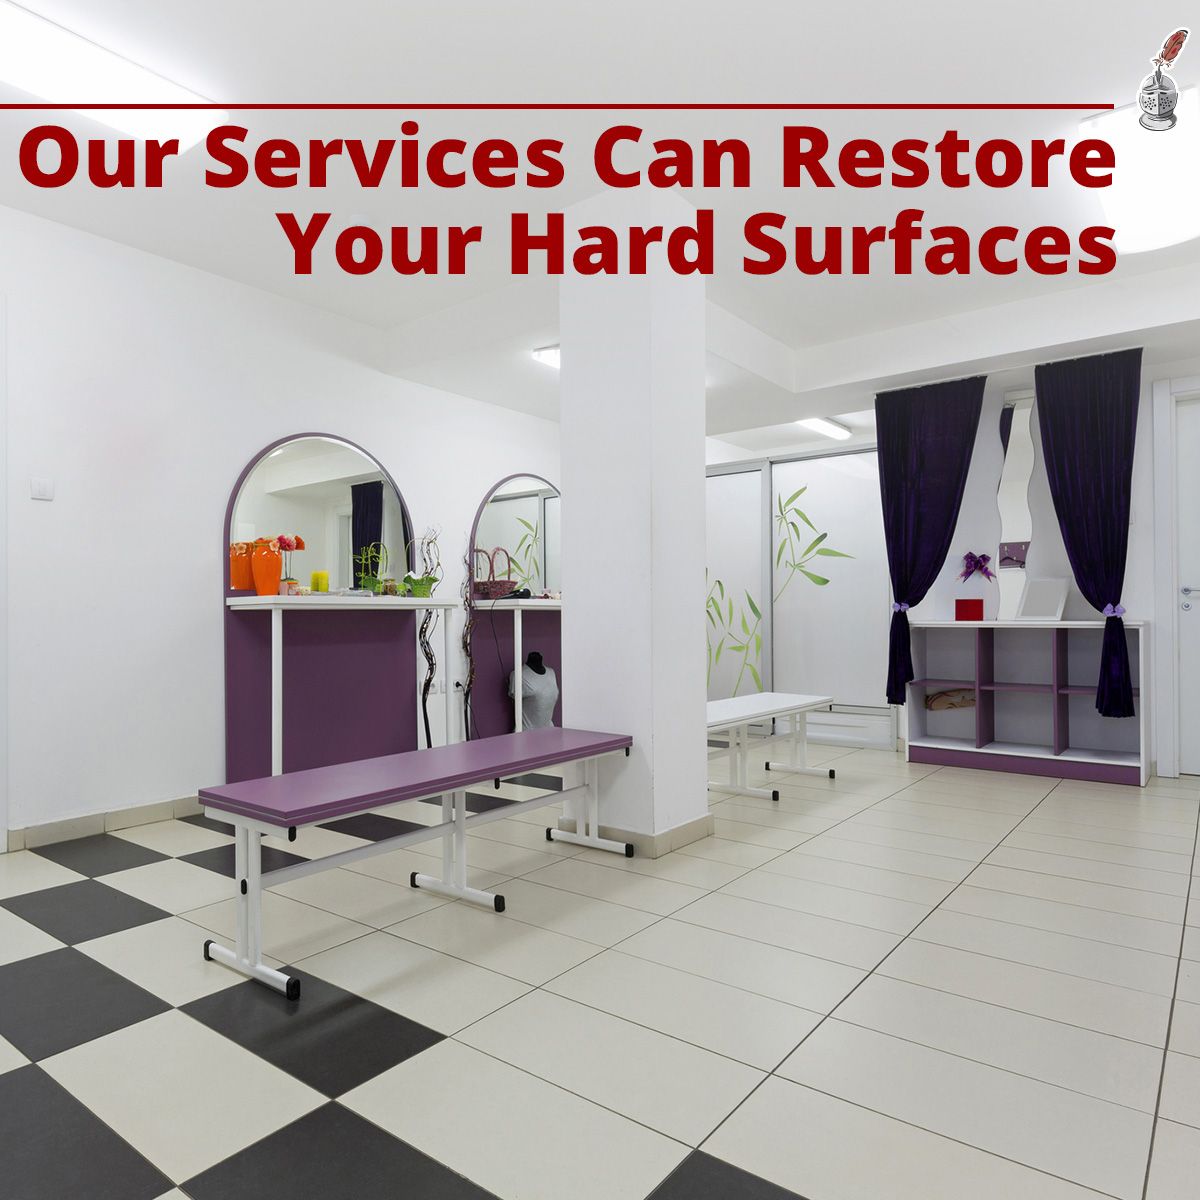 Our Services Can Restore Your Hard Surfaces